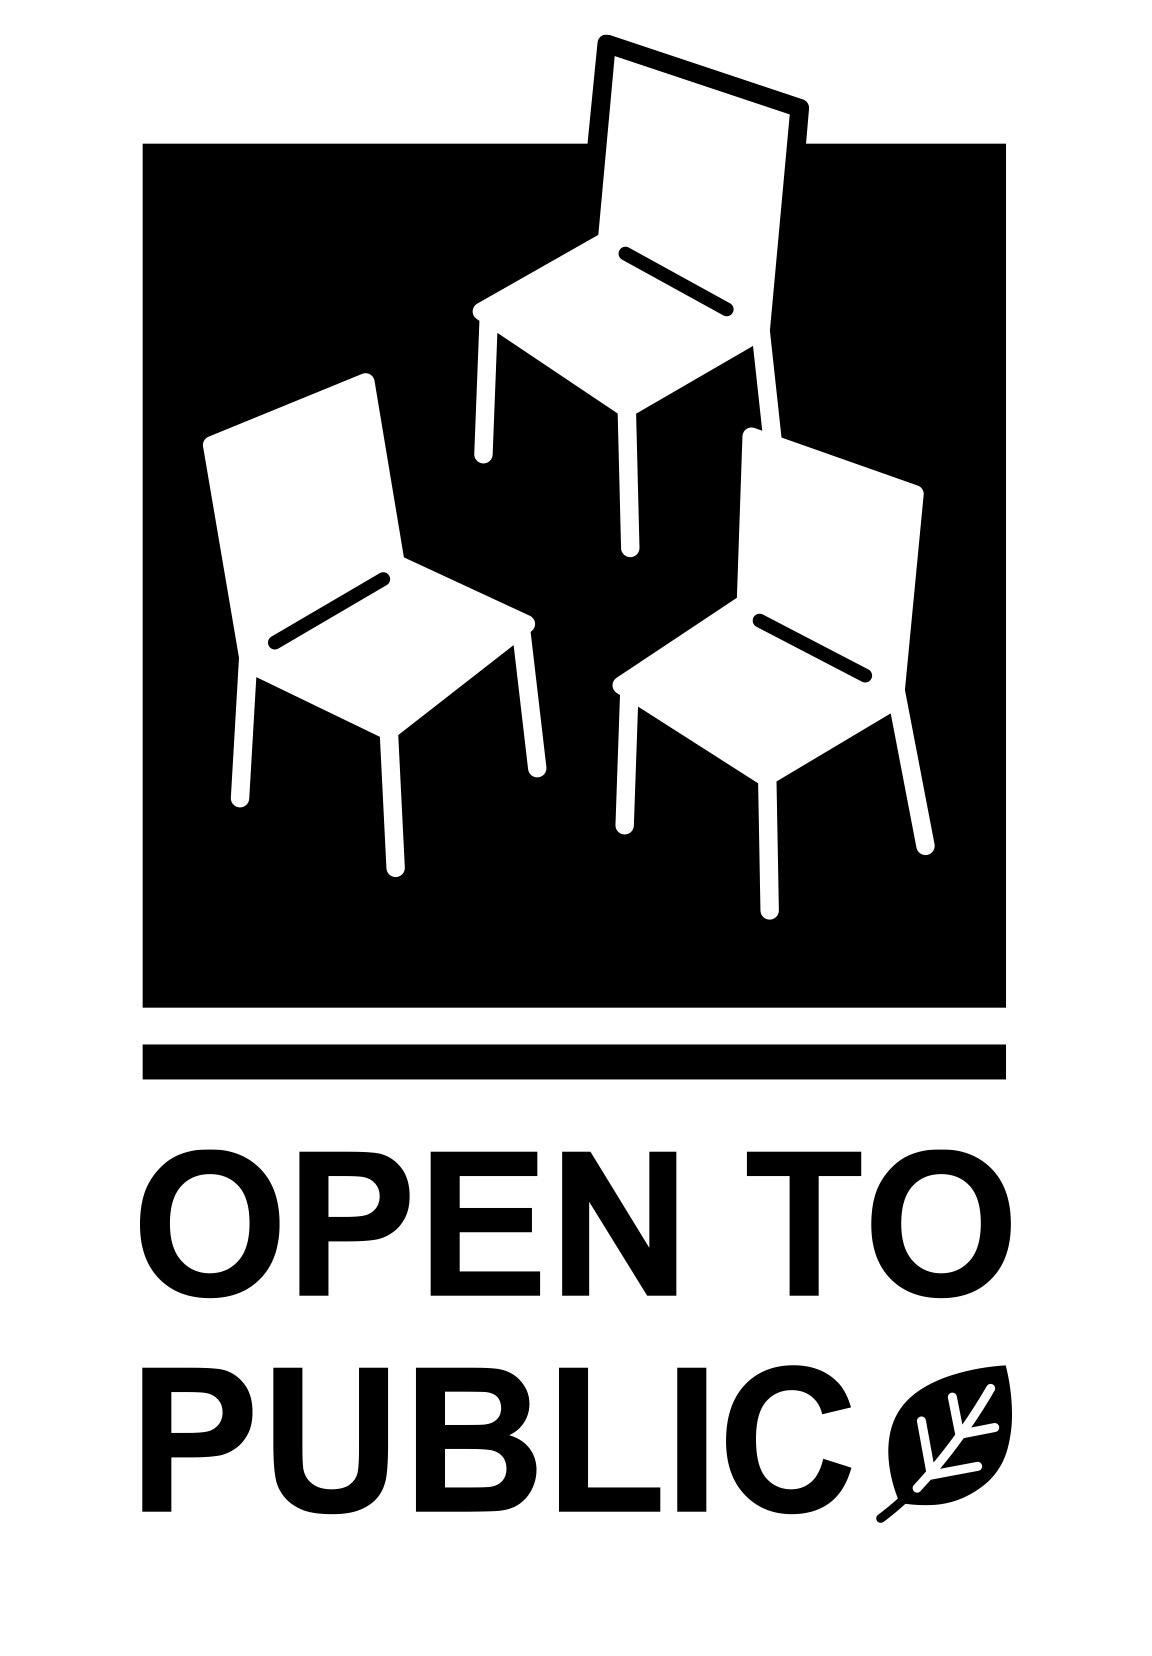 Black and white logo depicts three chairs inside a square